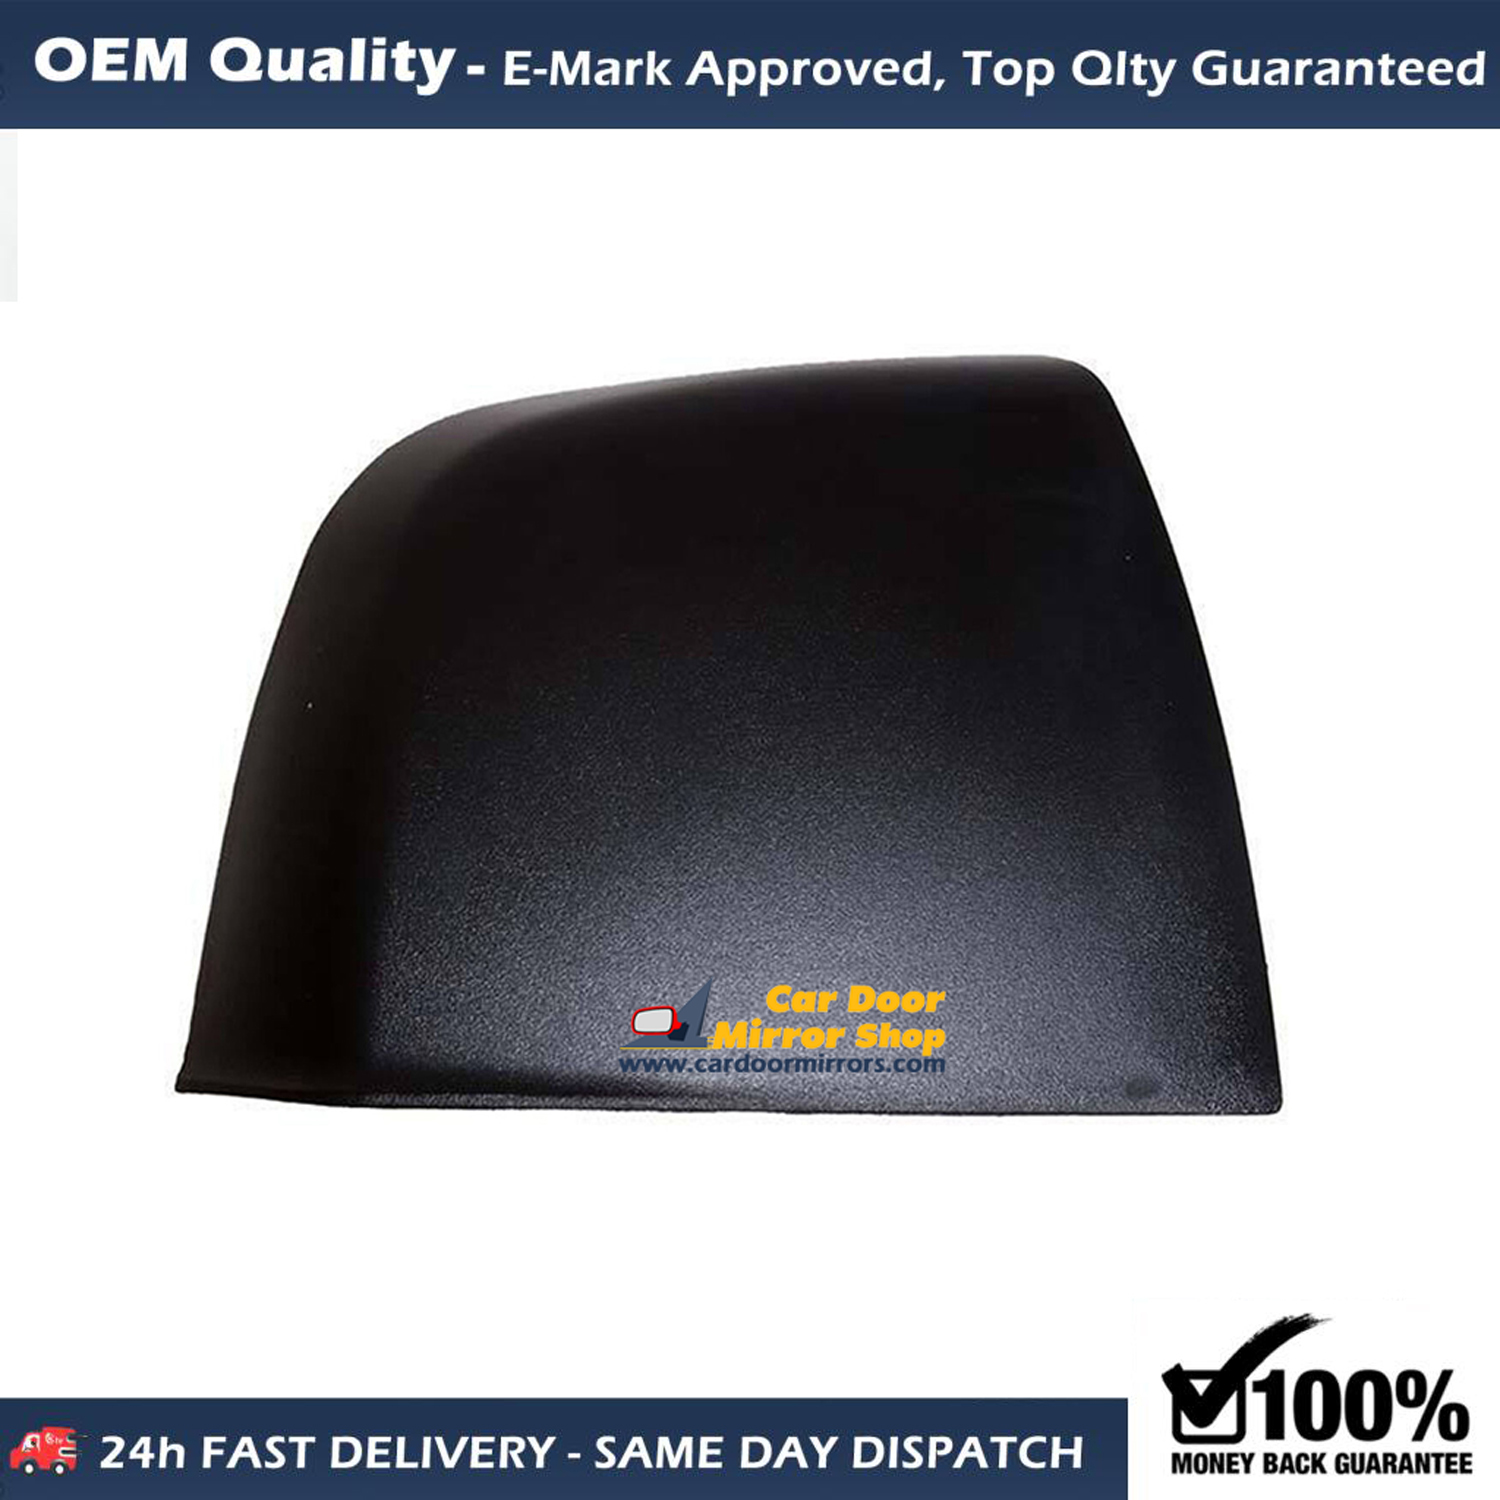 FIAT Doblo Wing Mirror Cover LEFT HAND ( UK Passenger Side ) 2009 to 2020 – Wing Mirror Cover